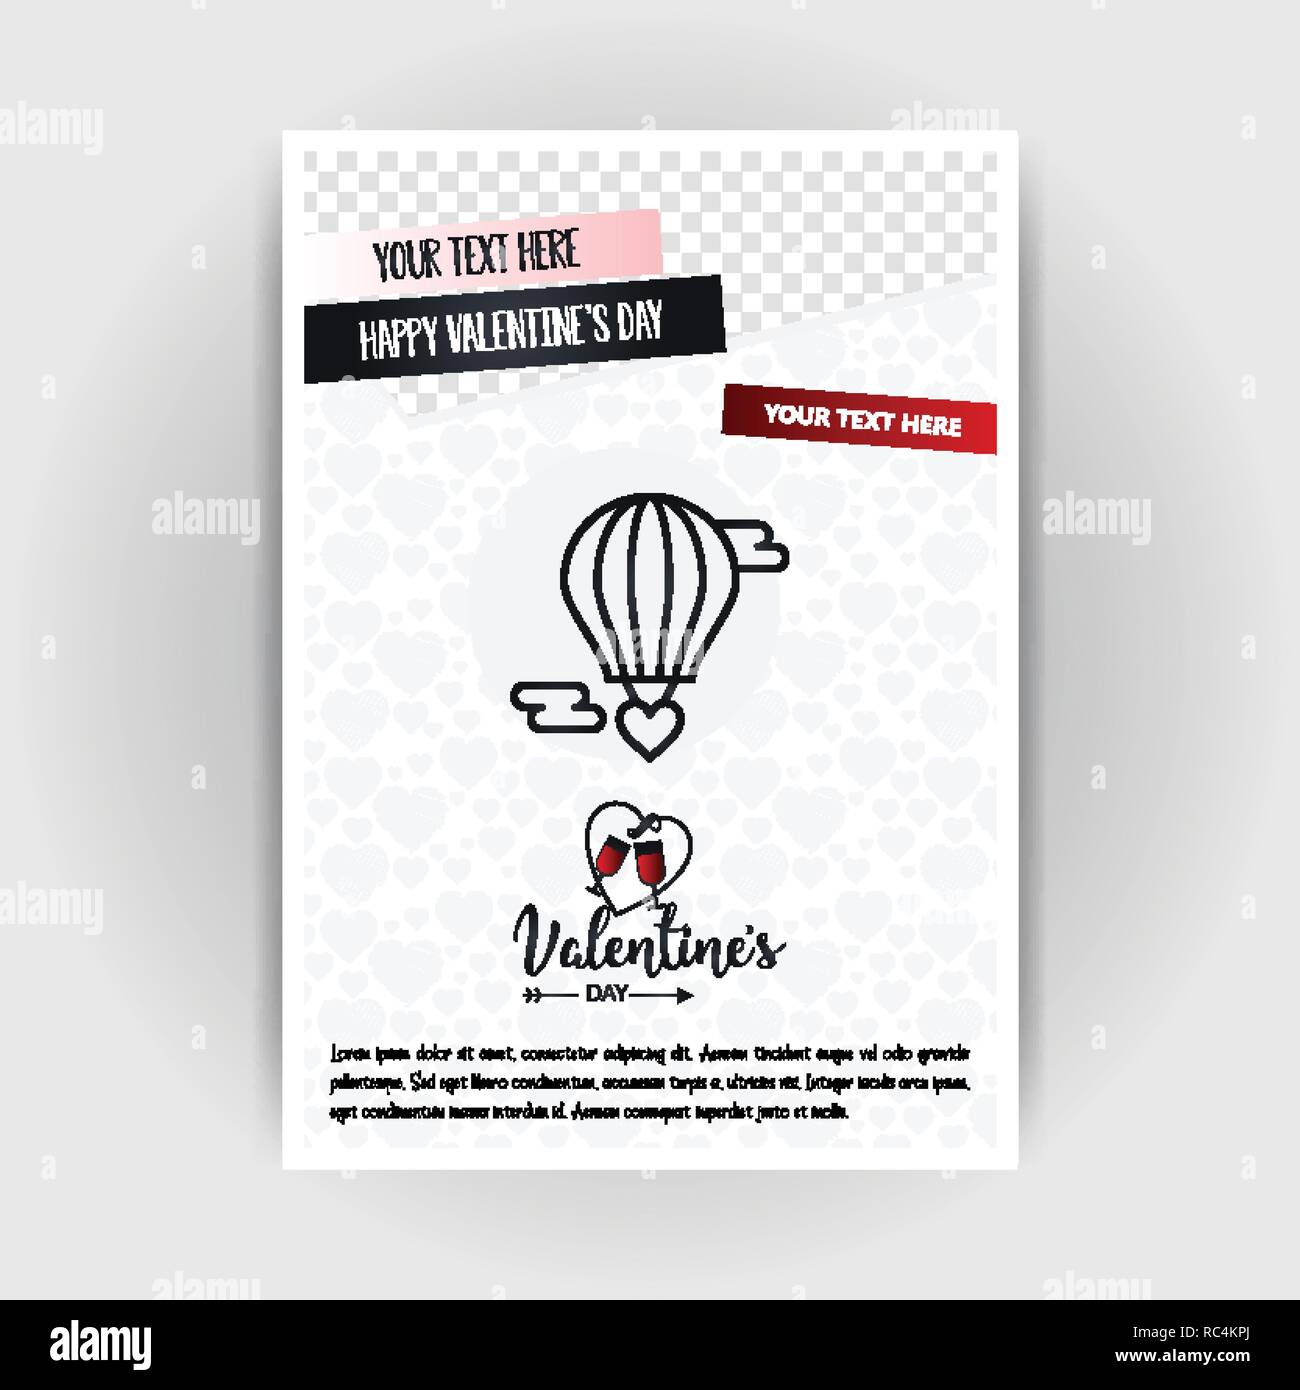 Valentine's Day Love Poster Template. Place for Images and text, vector illustration Stock Vector